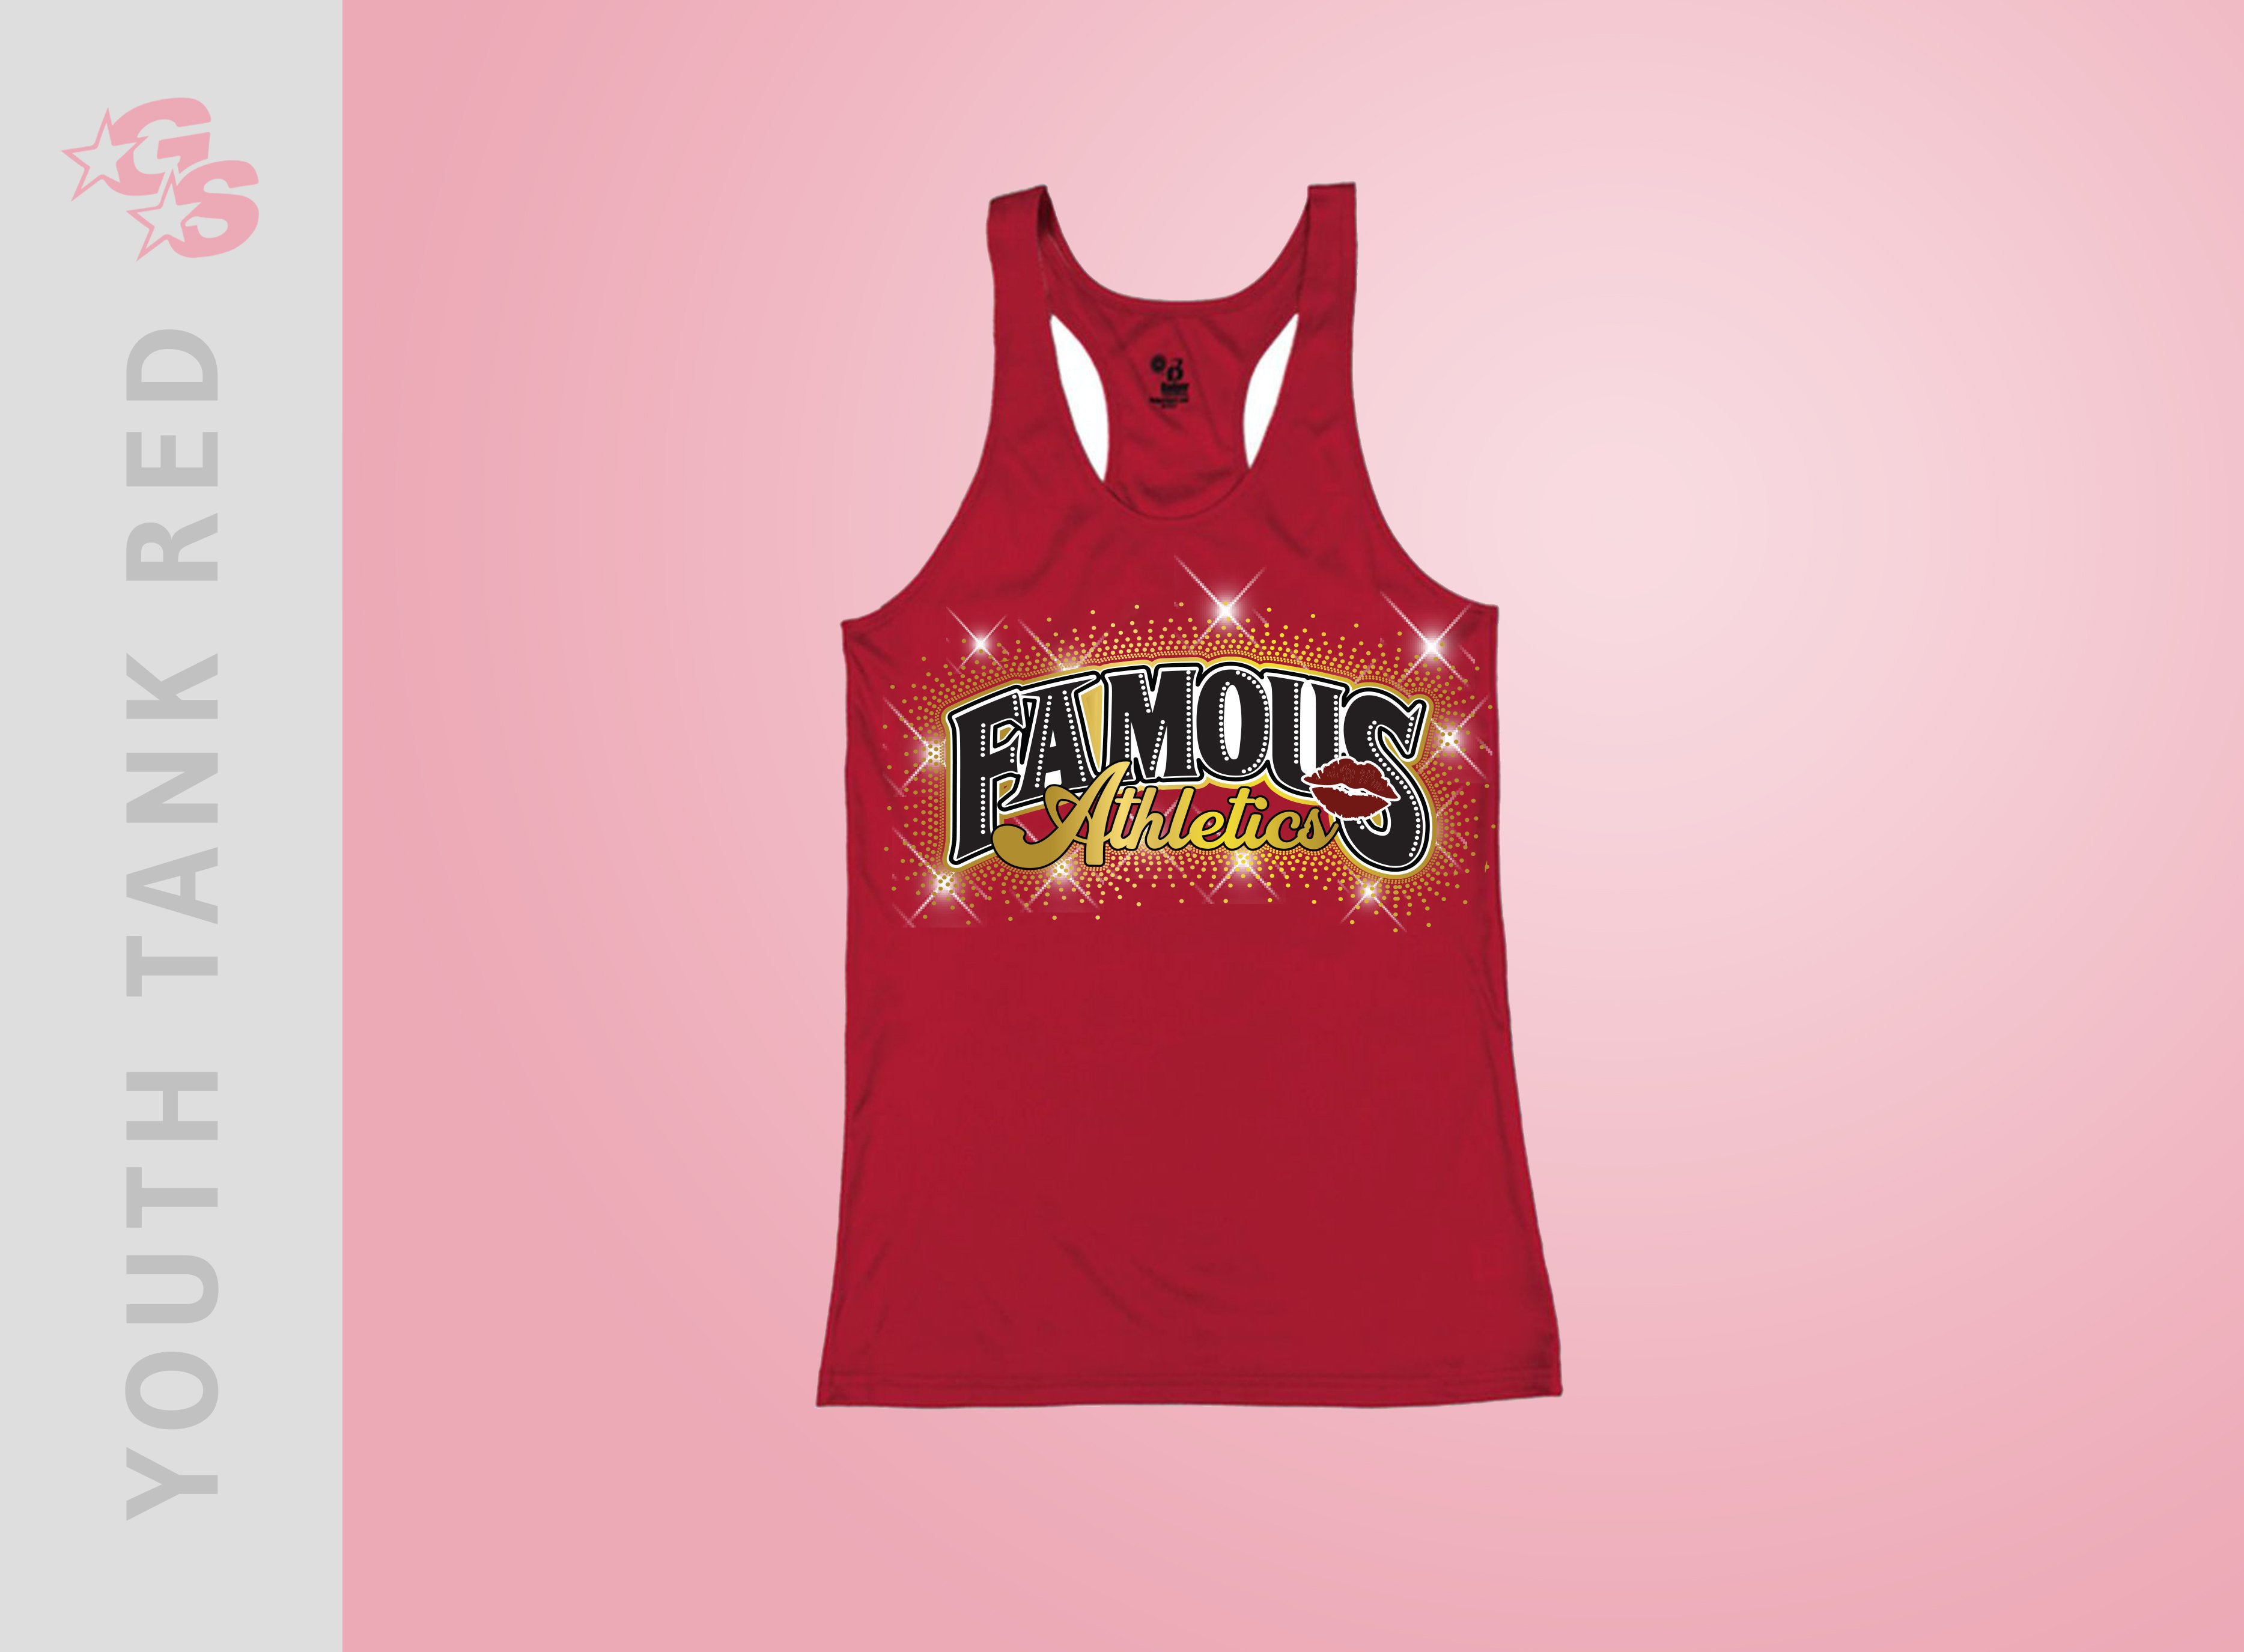 Famous Athletics Red Tank Female Fit with Vinyl and Bling Mix Logo